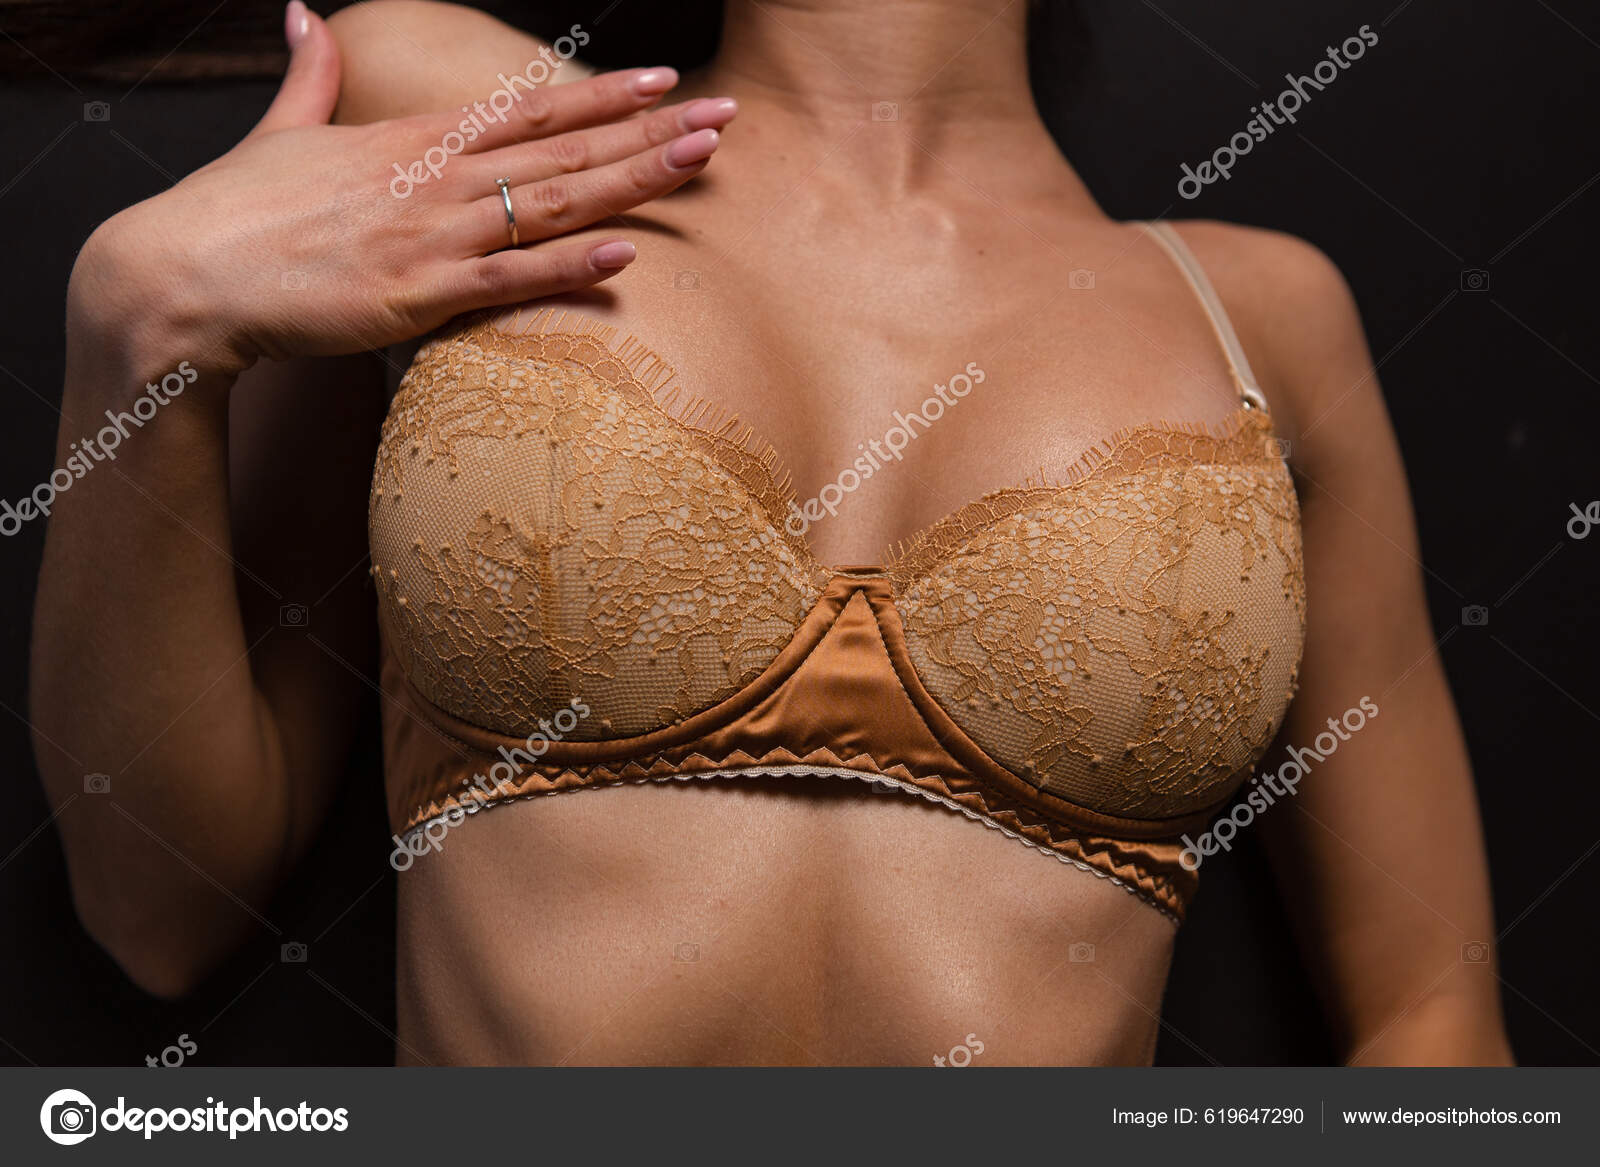 Beautiful Woman's Tanned Athletic Body Lingerie Stock Photo by  ©alexbutko_com 619647290